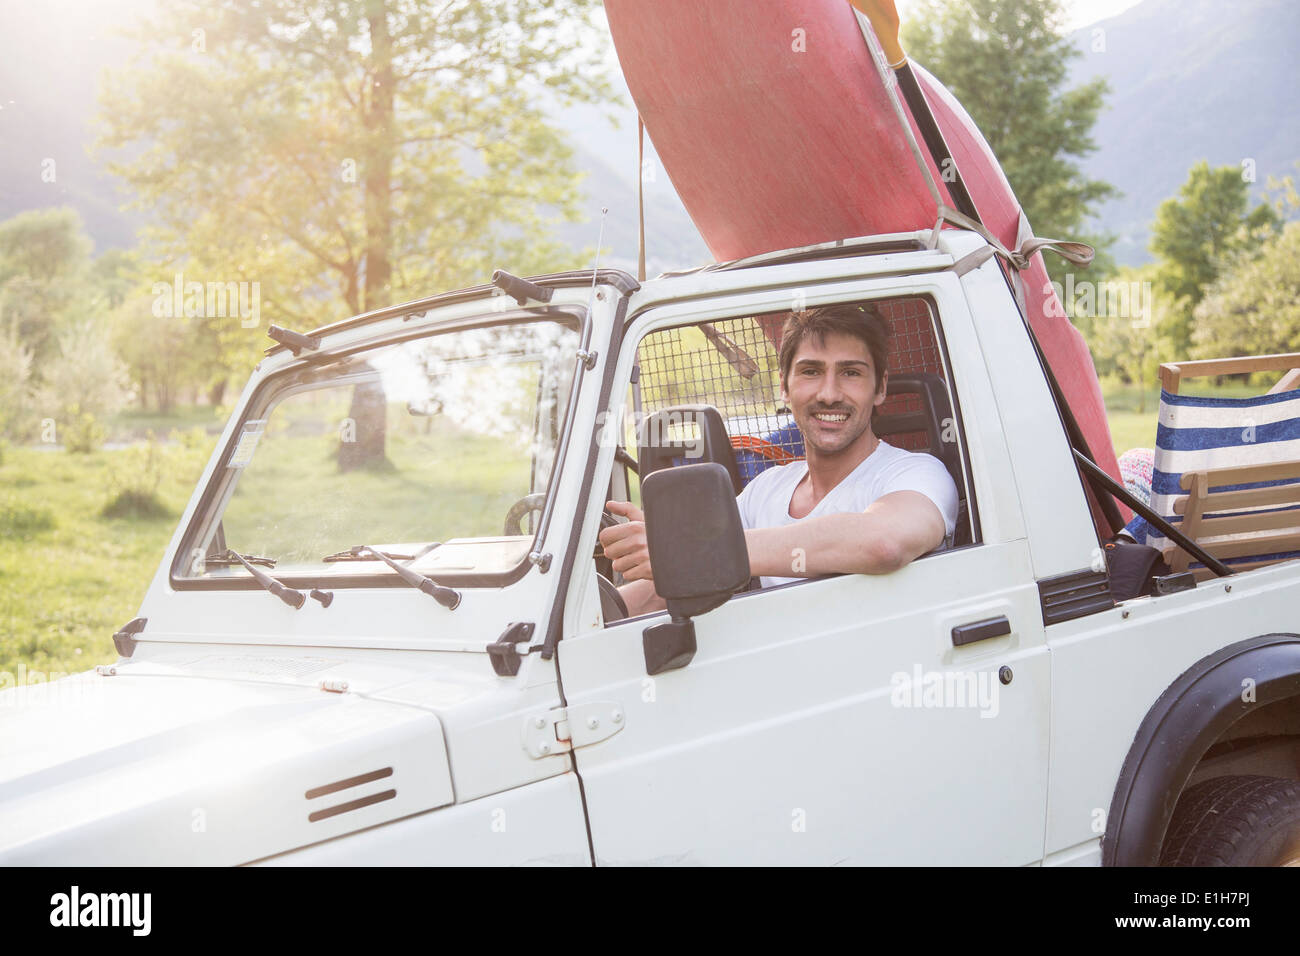 Young man driving off road vehicle Stock Photo